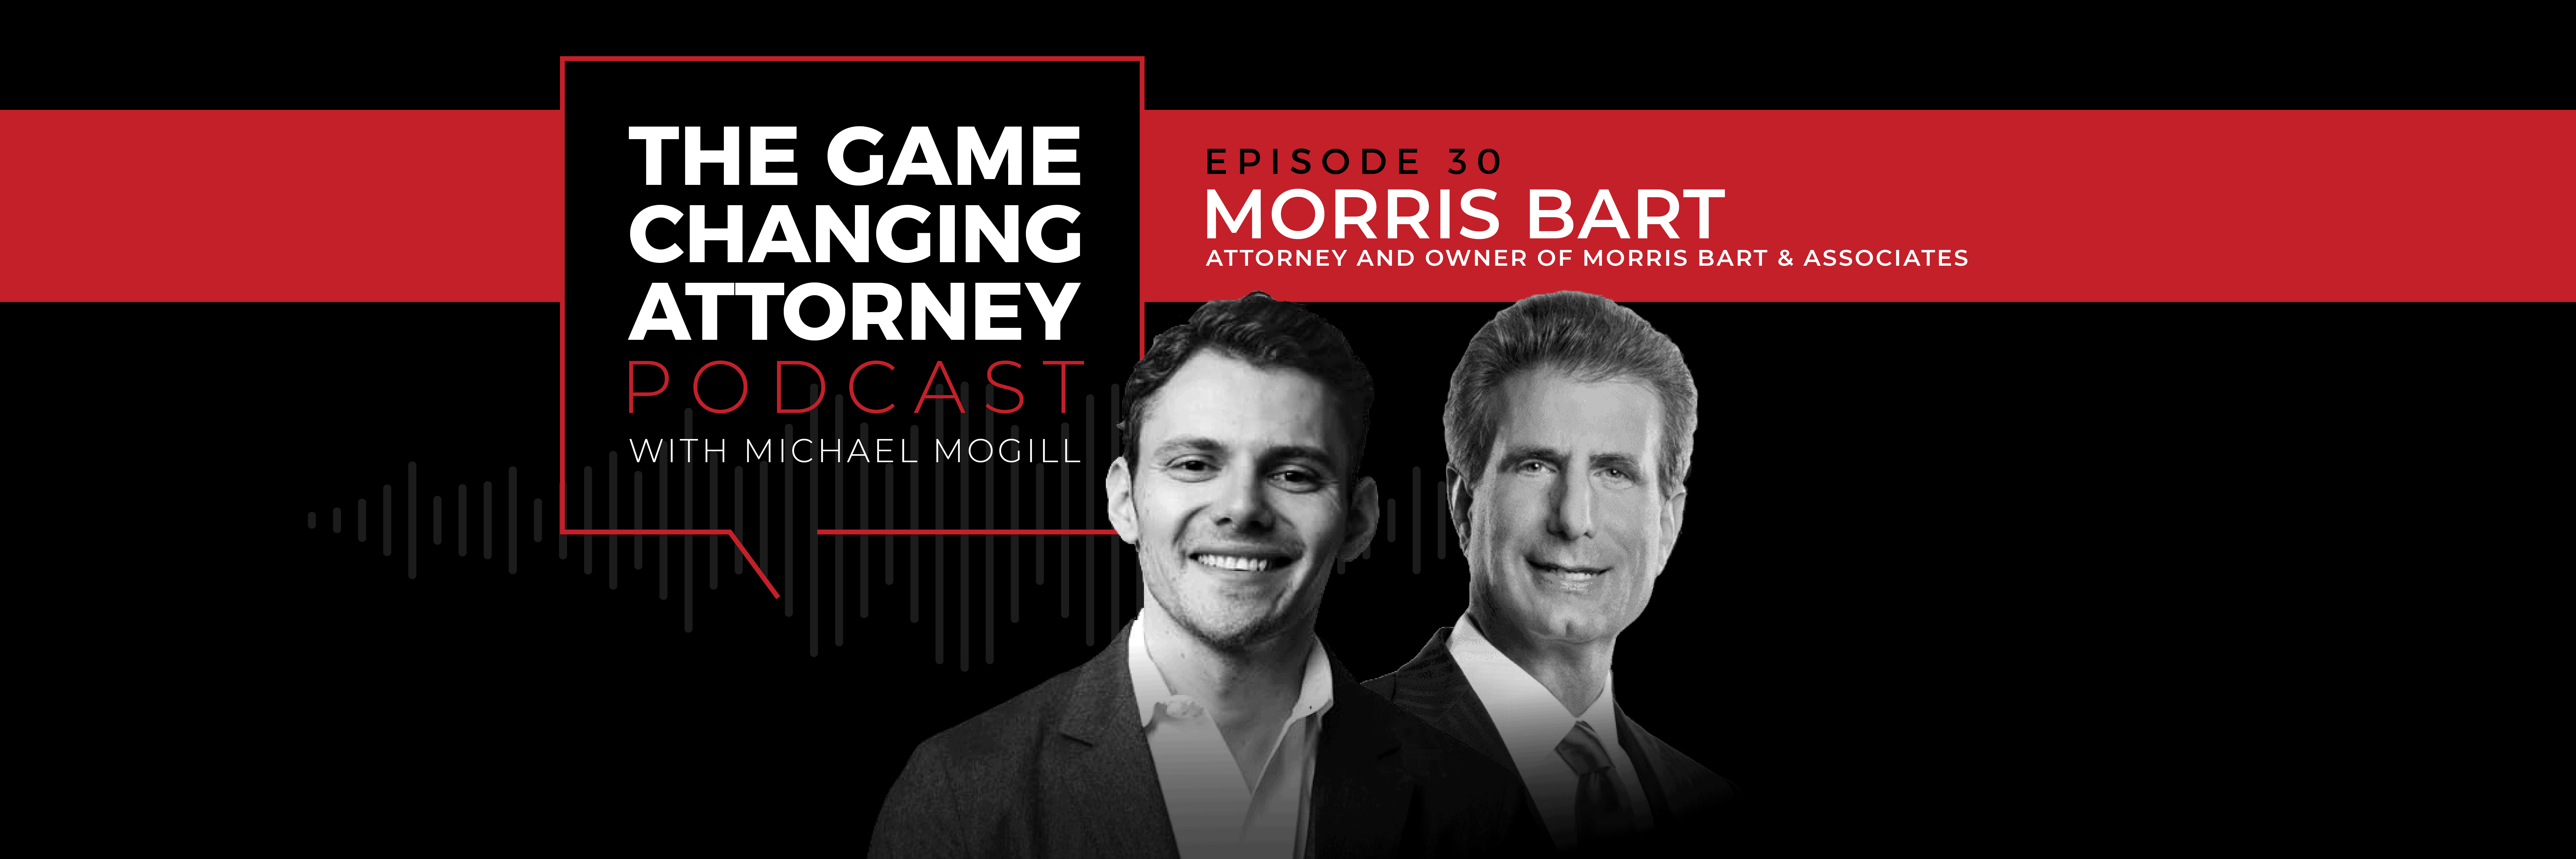 Morris Bart - The Game Changing Attorney Podcast - Desktop